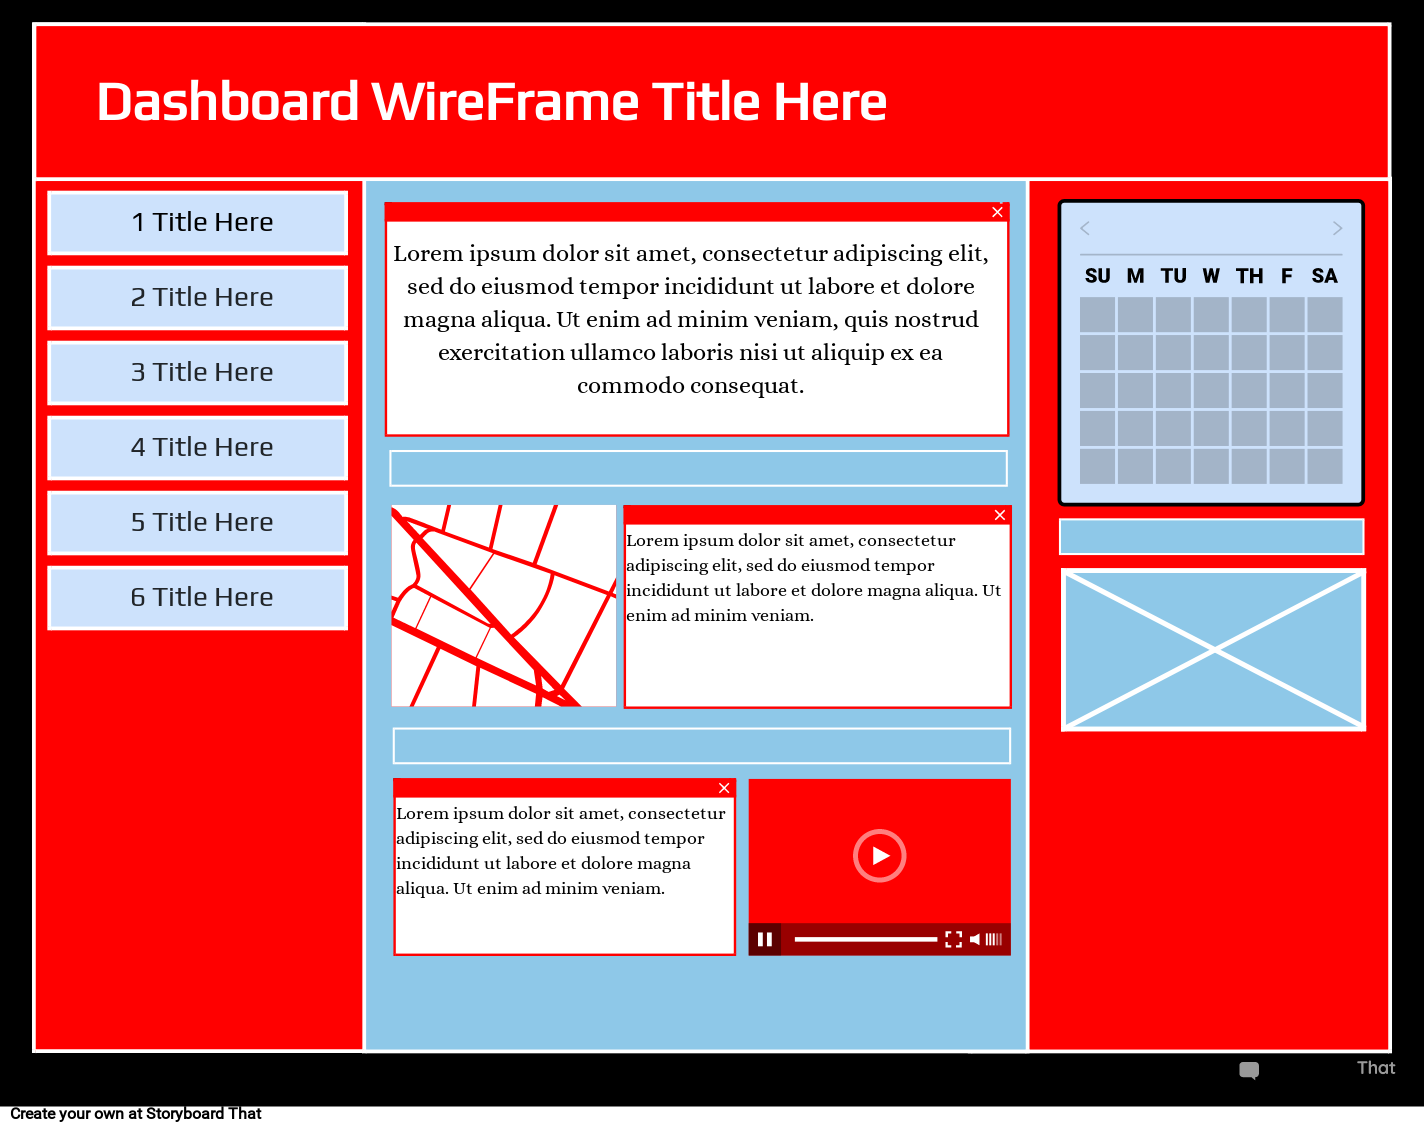 Corporate Dashboard Wireframe Template 3